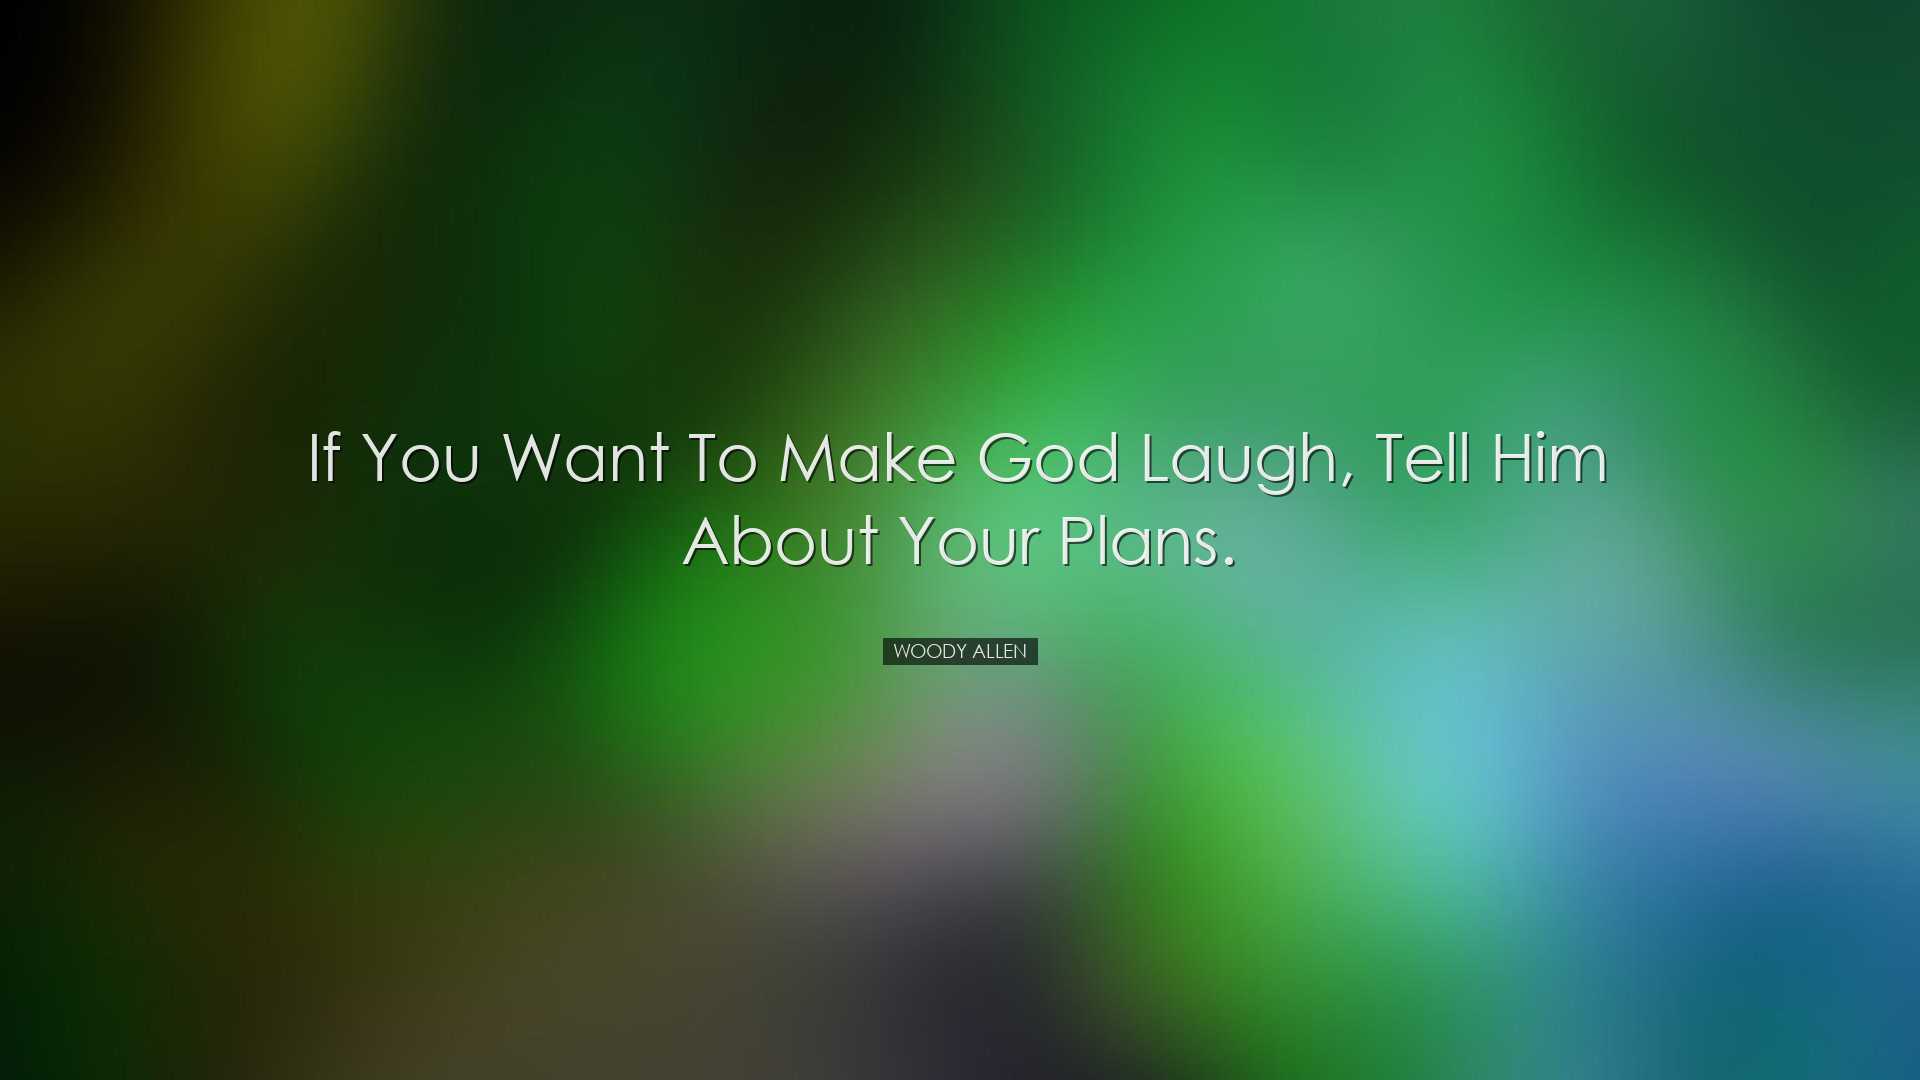 If you want to make God laugh, tell him about your plans. - Woody